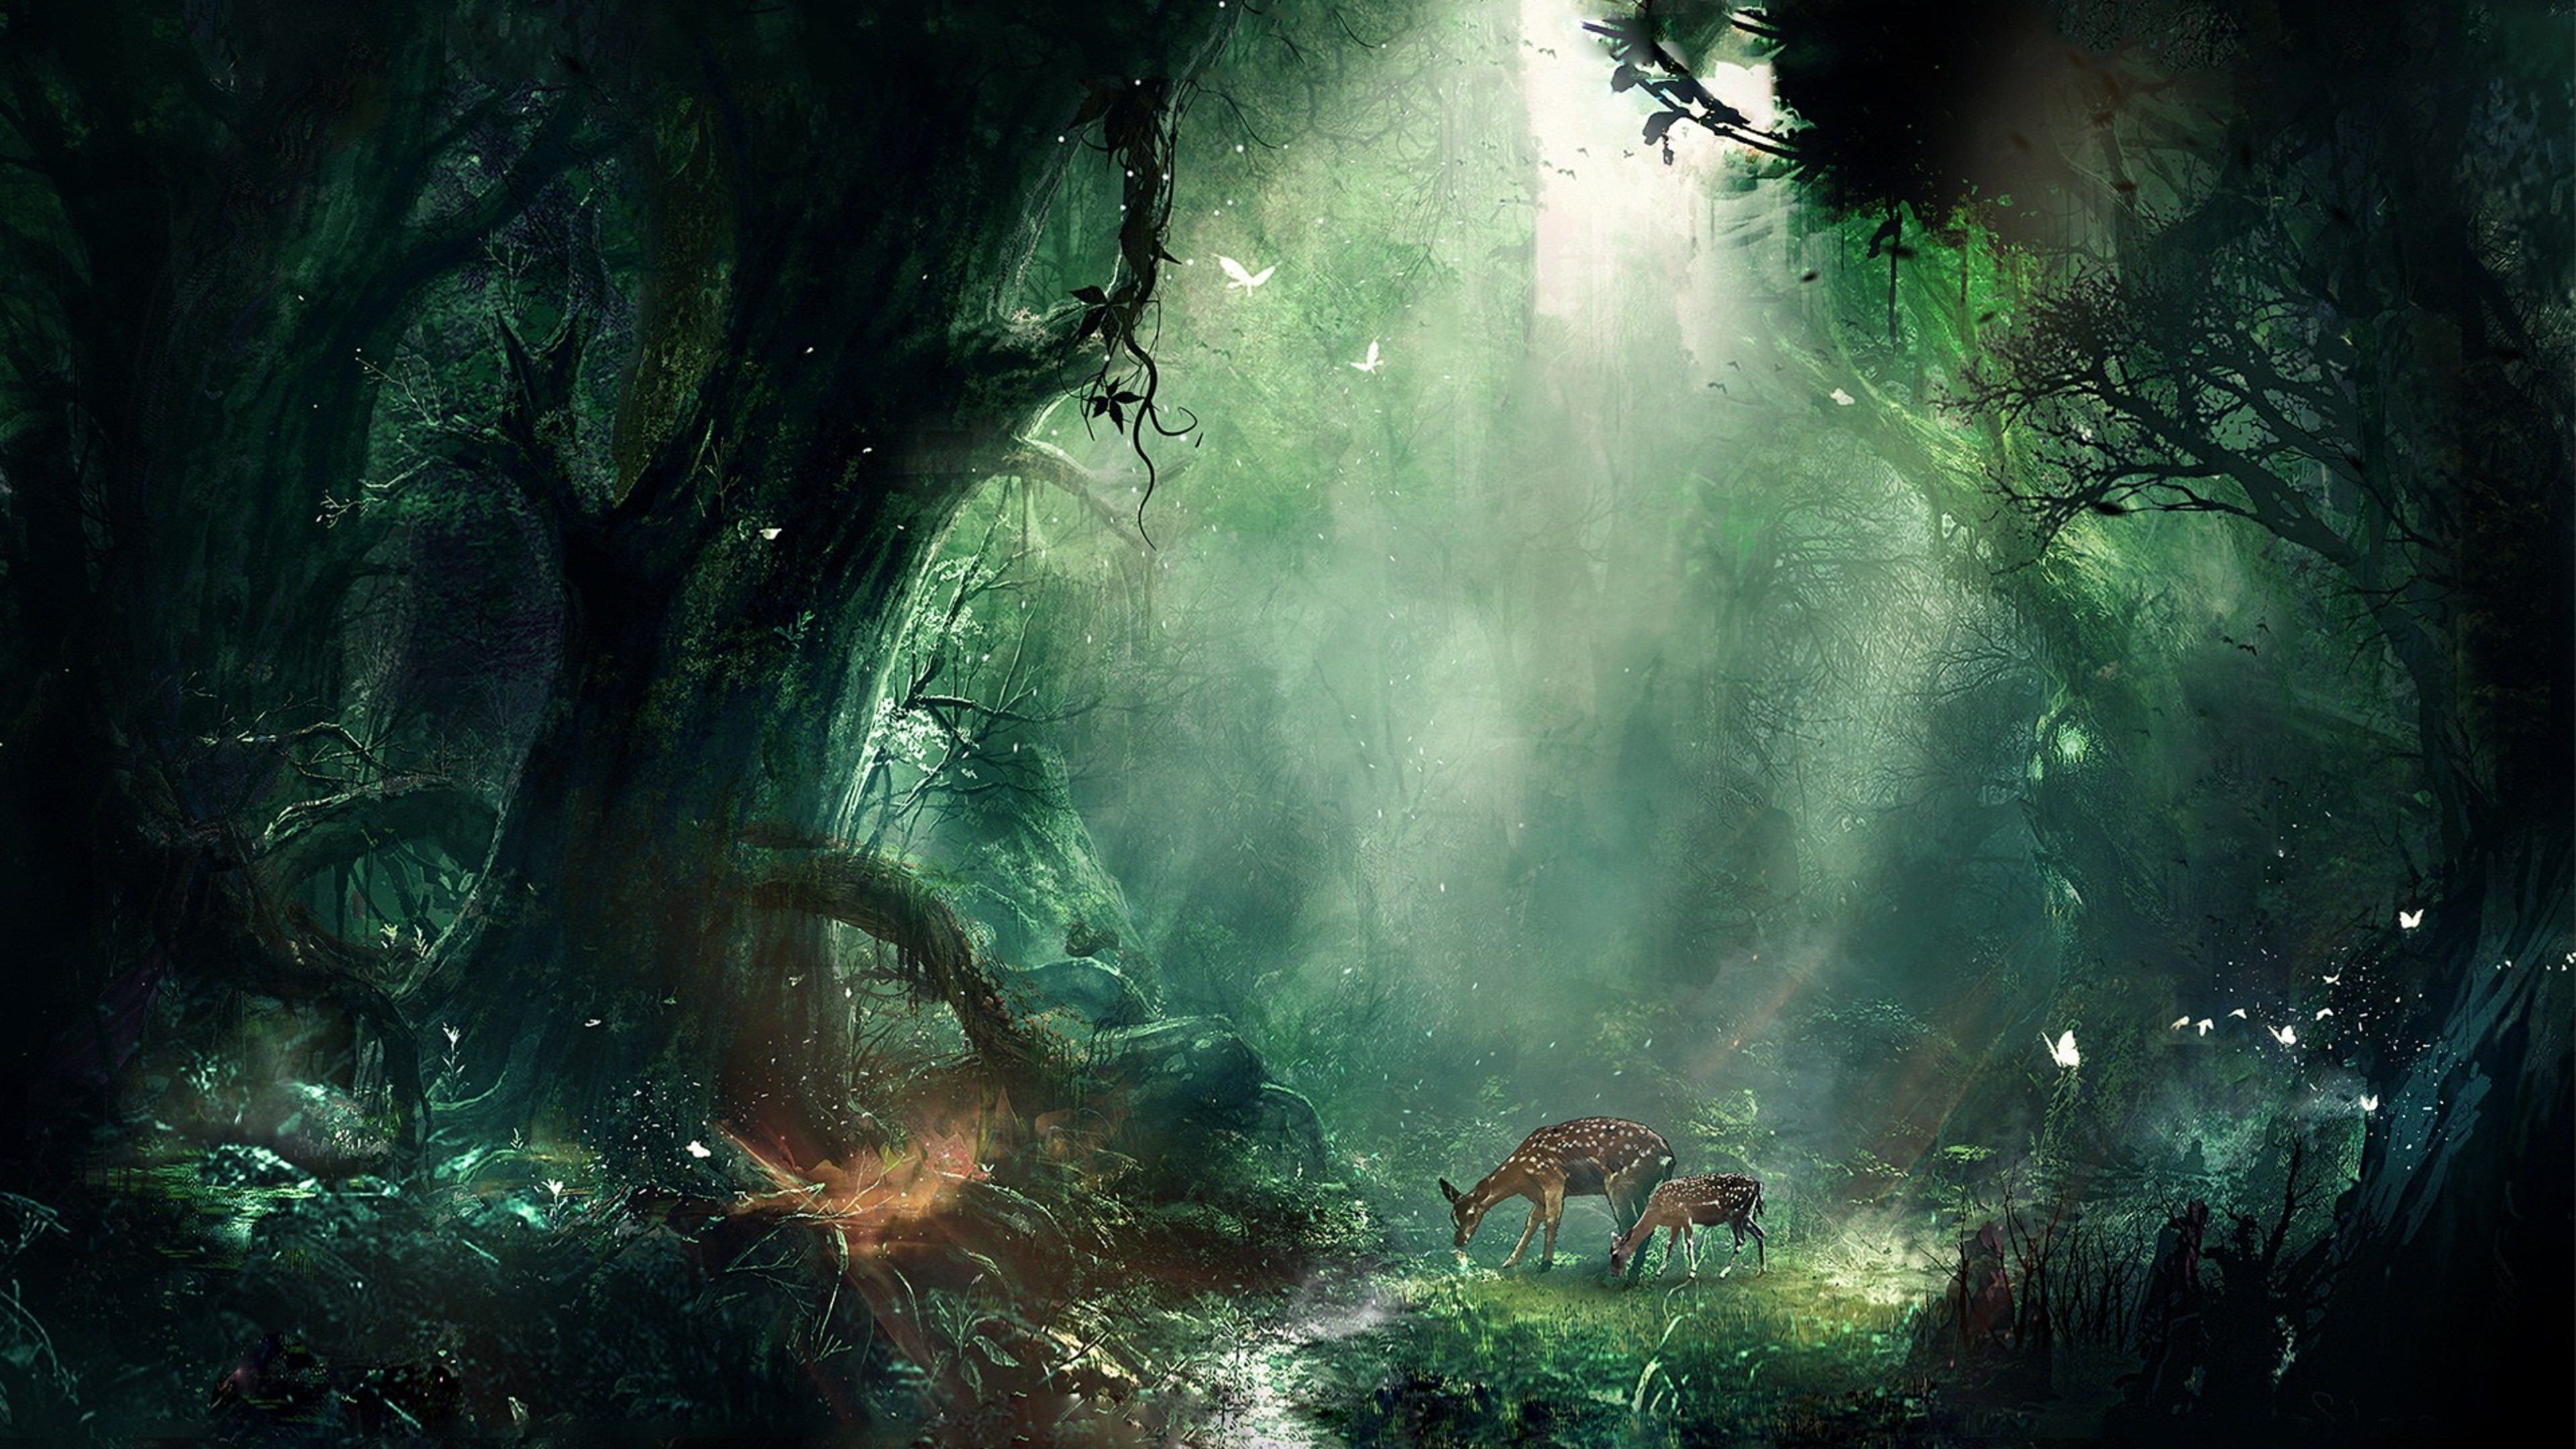 Fantasy art wallpaper of a forest with deer - Jungle